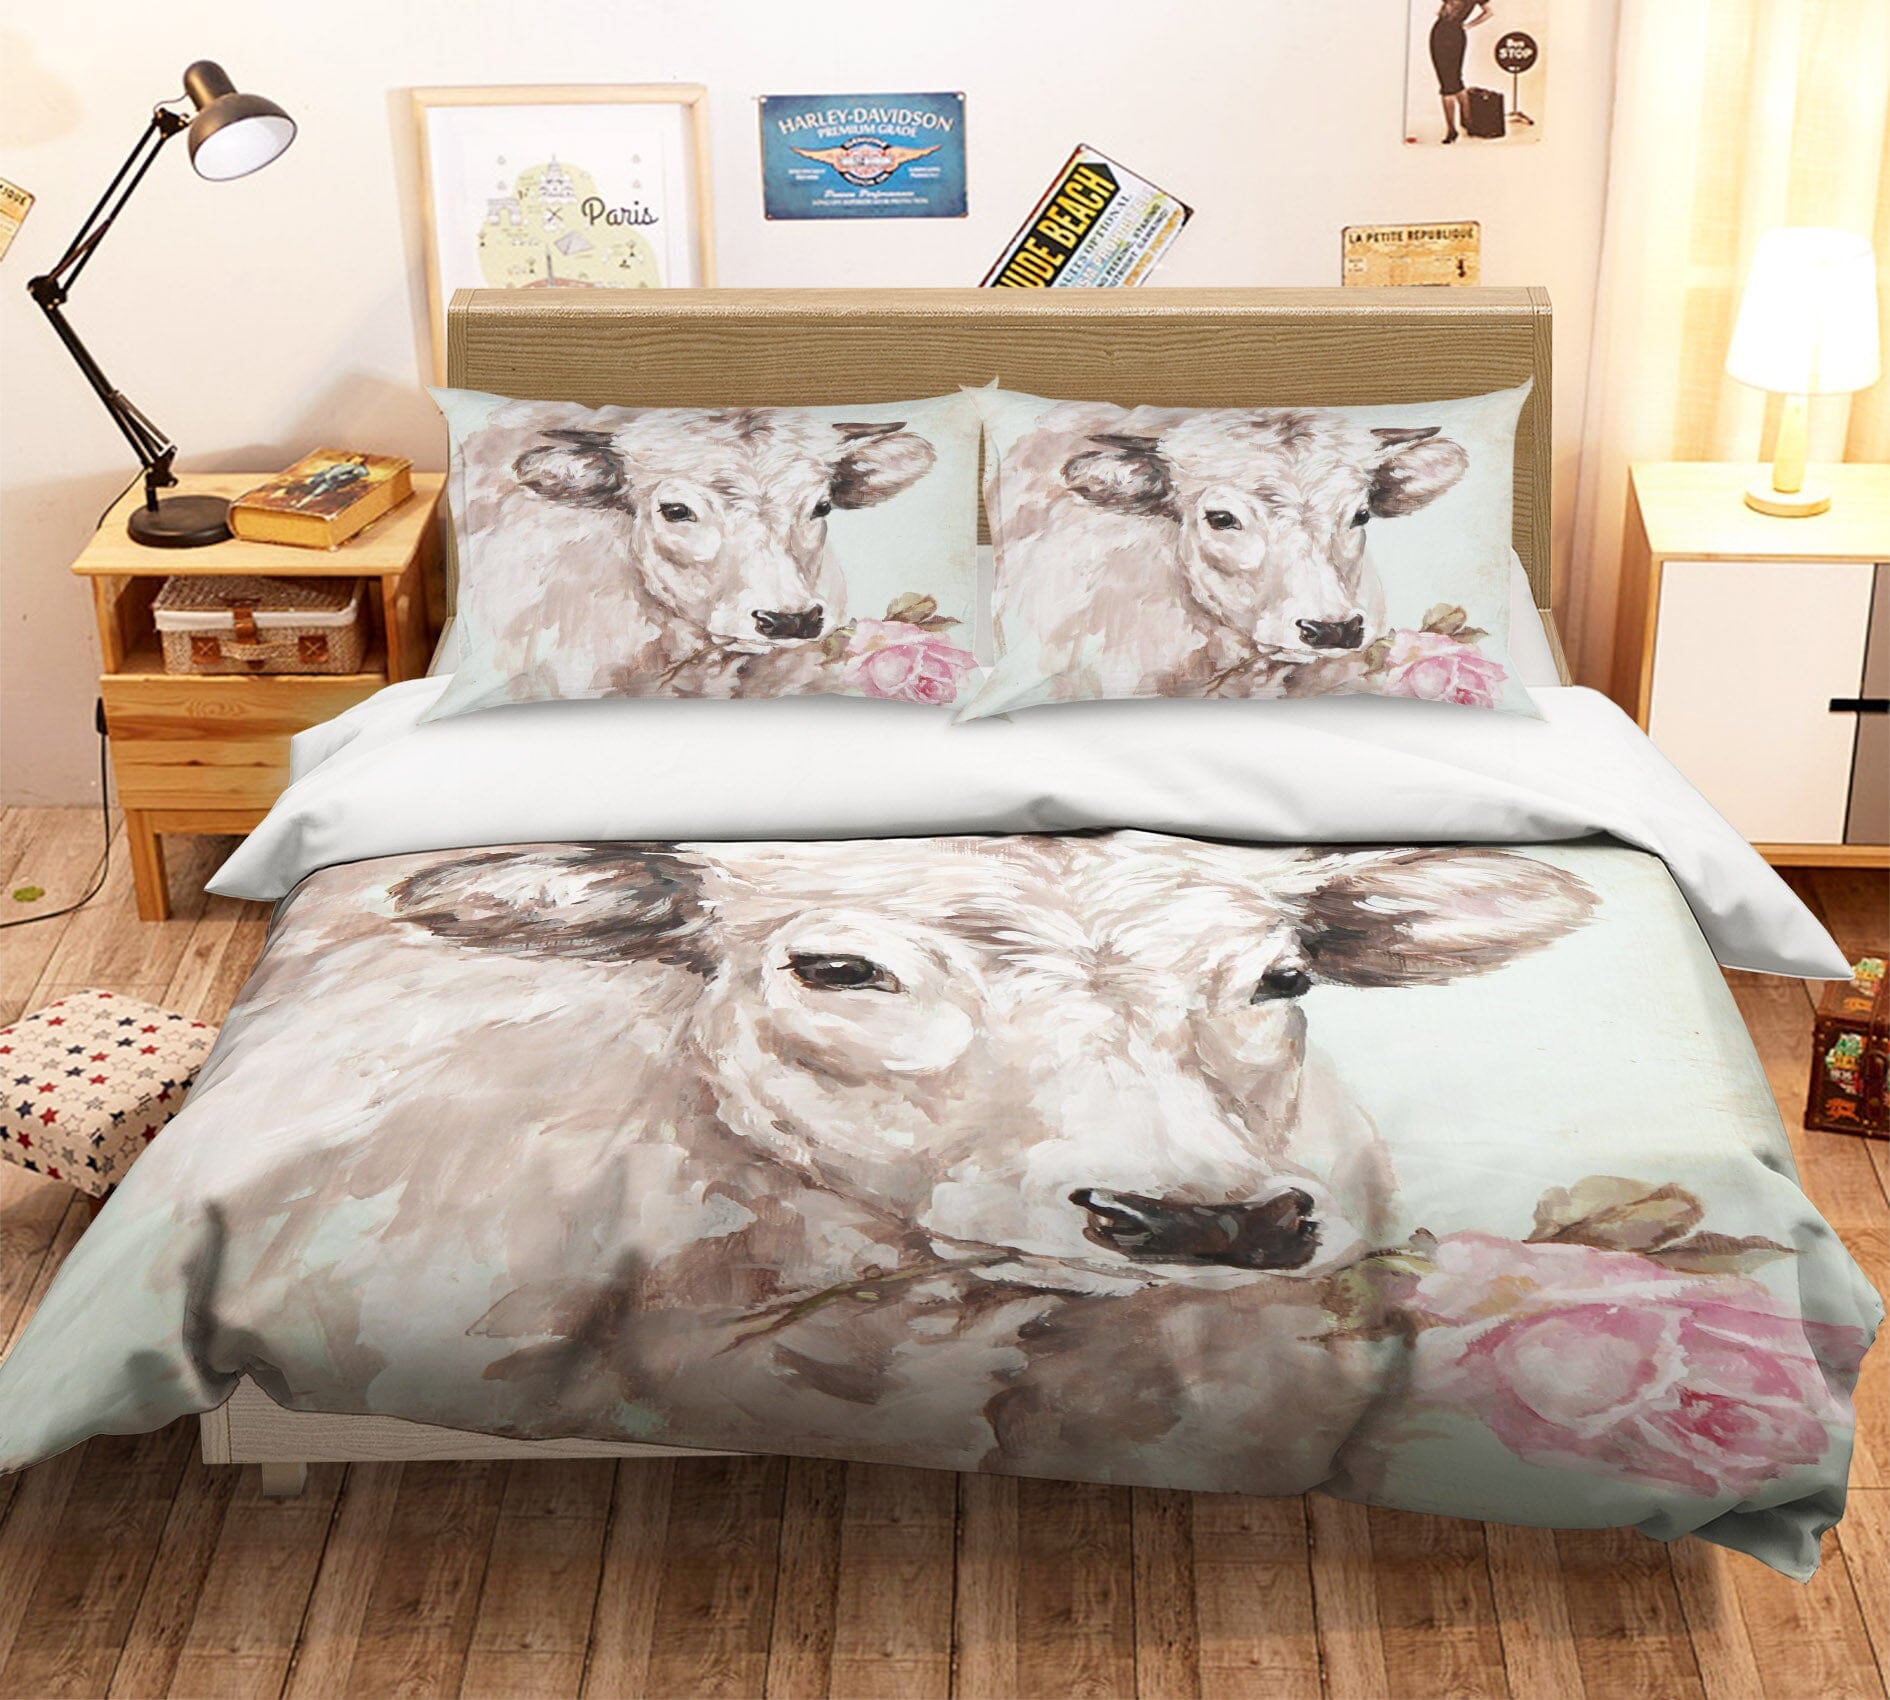 3D Cow Rose 023 Debi Coules Bedding Bed Pillowcases Quilt Quiet Covers AJ Creativity Home 